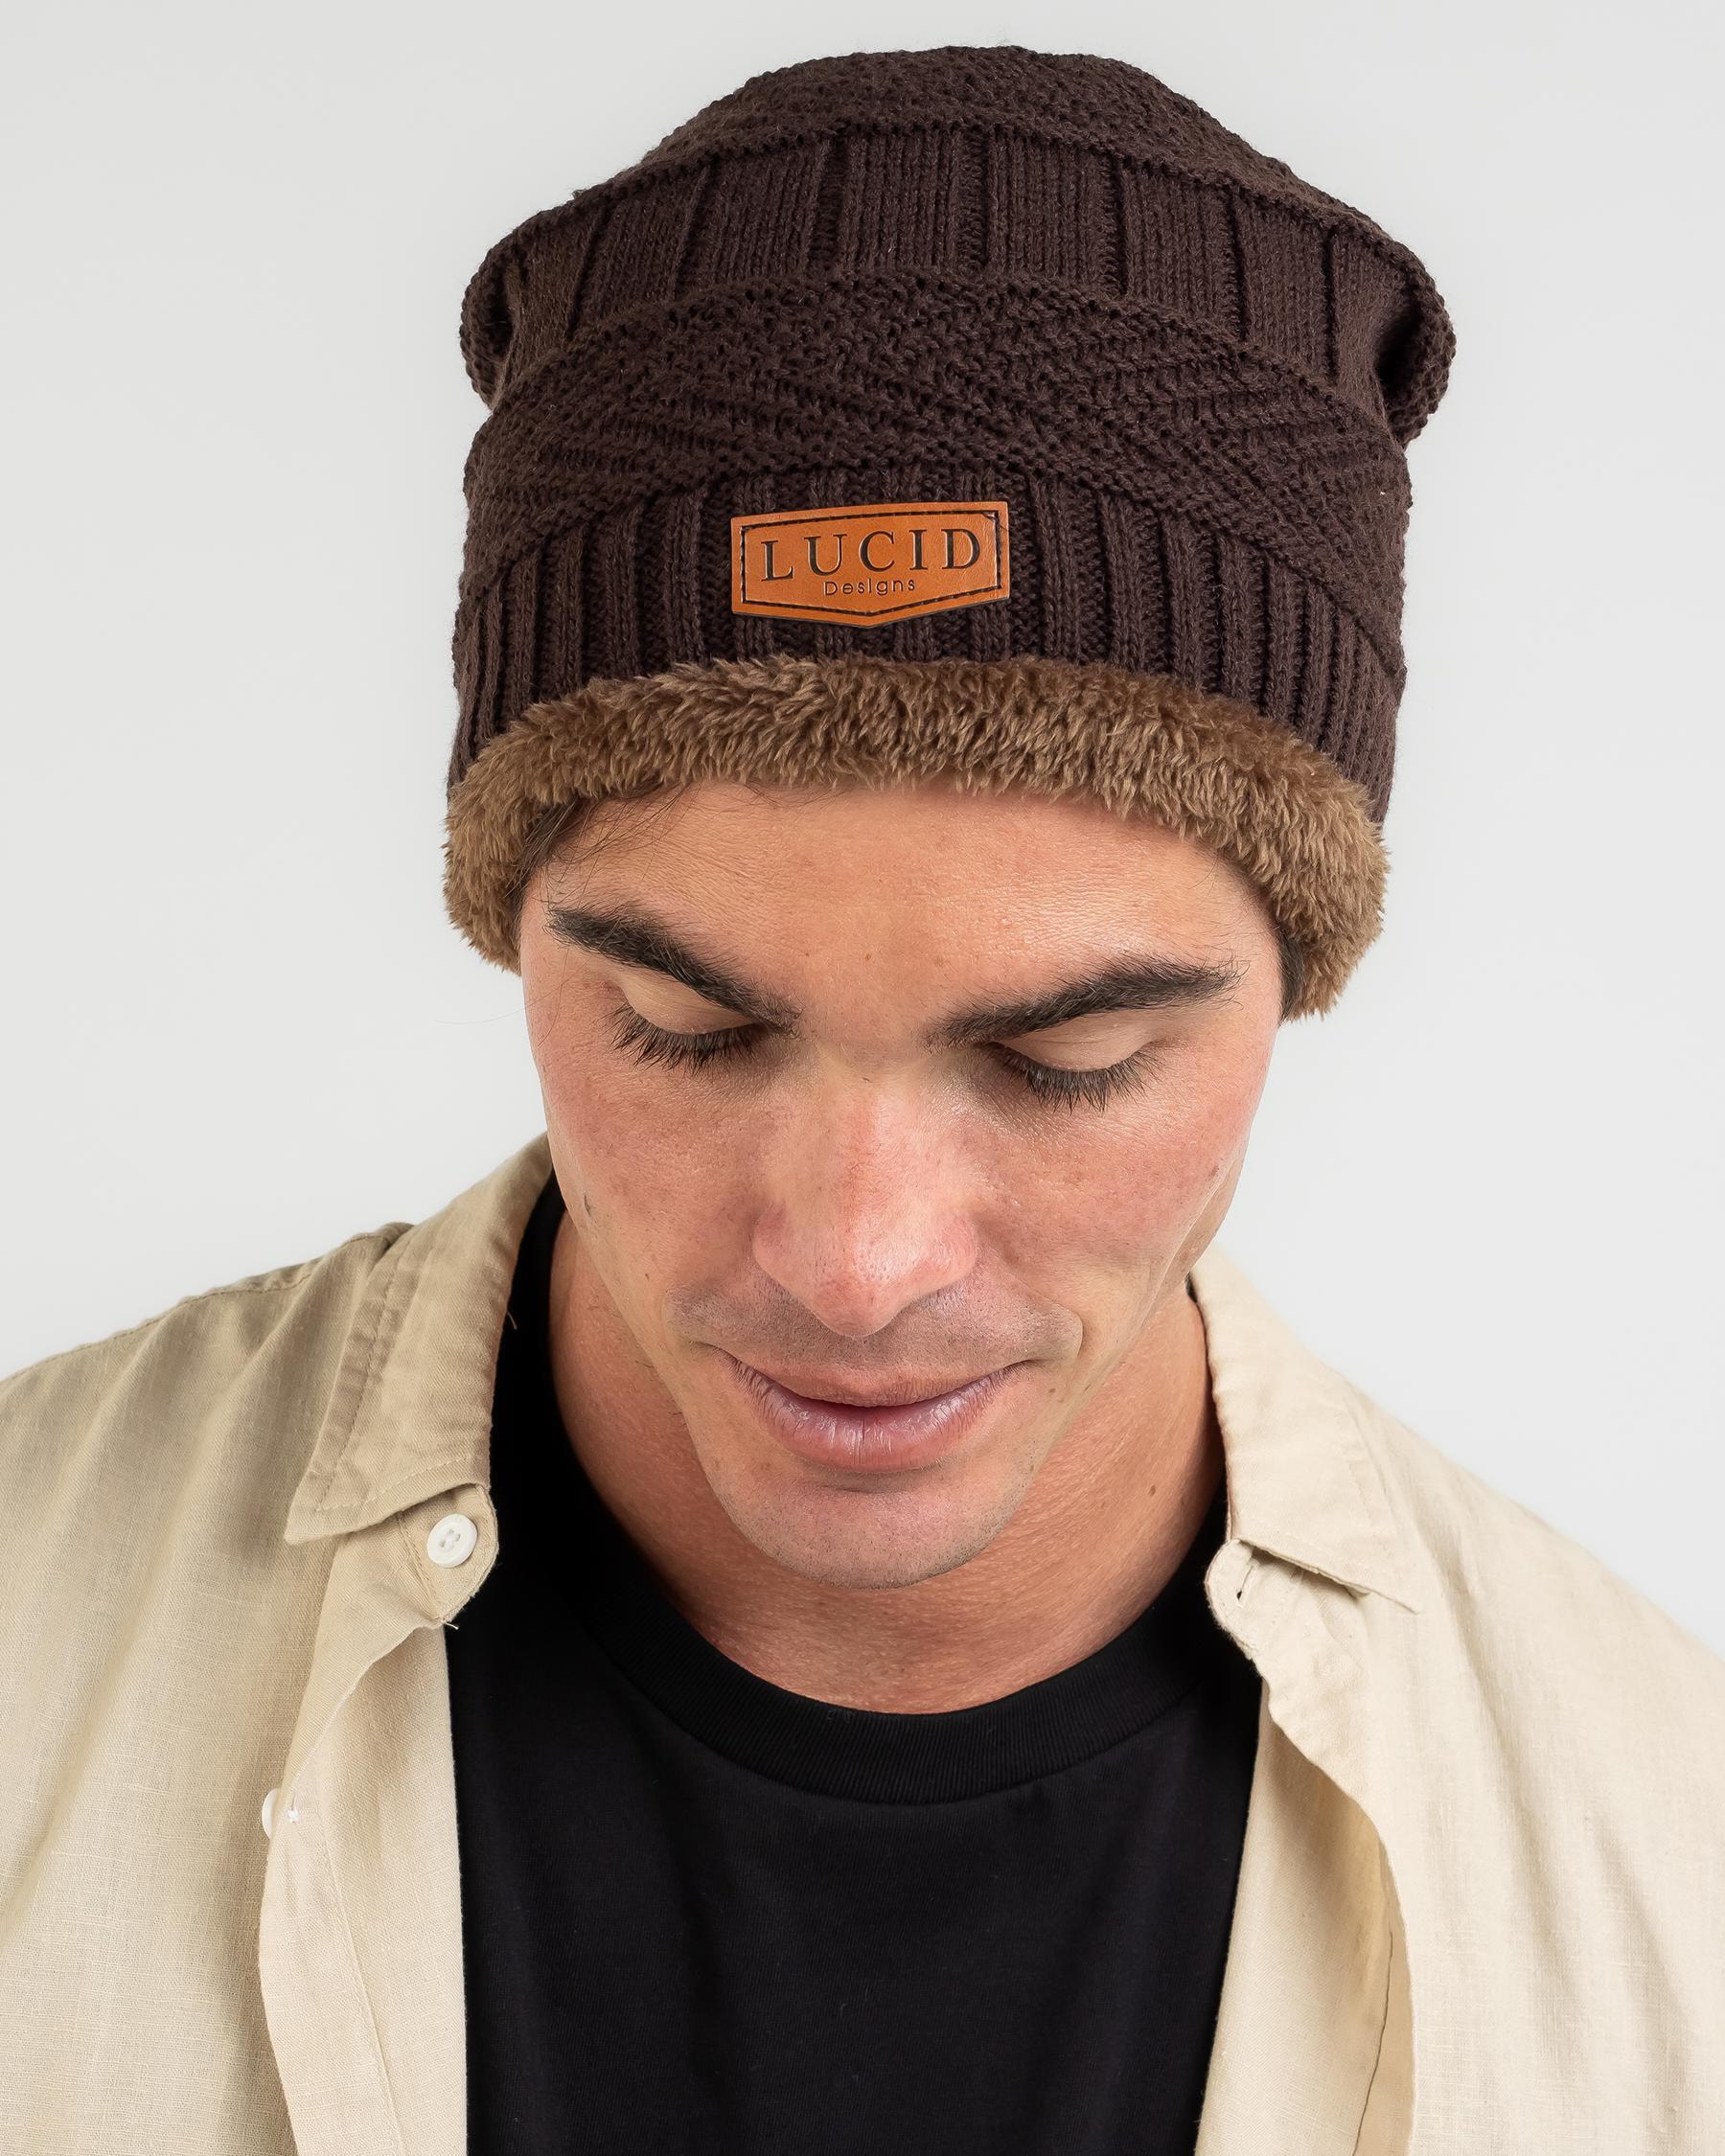 Lucid Trapper Beanie In Chocolate Brown - FREE* Shipping & Easy Returns ...